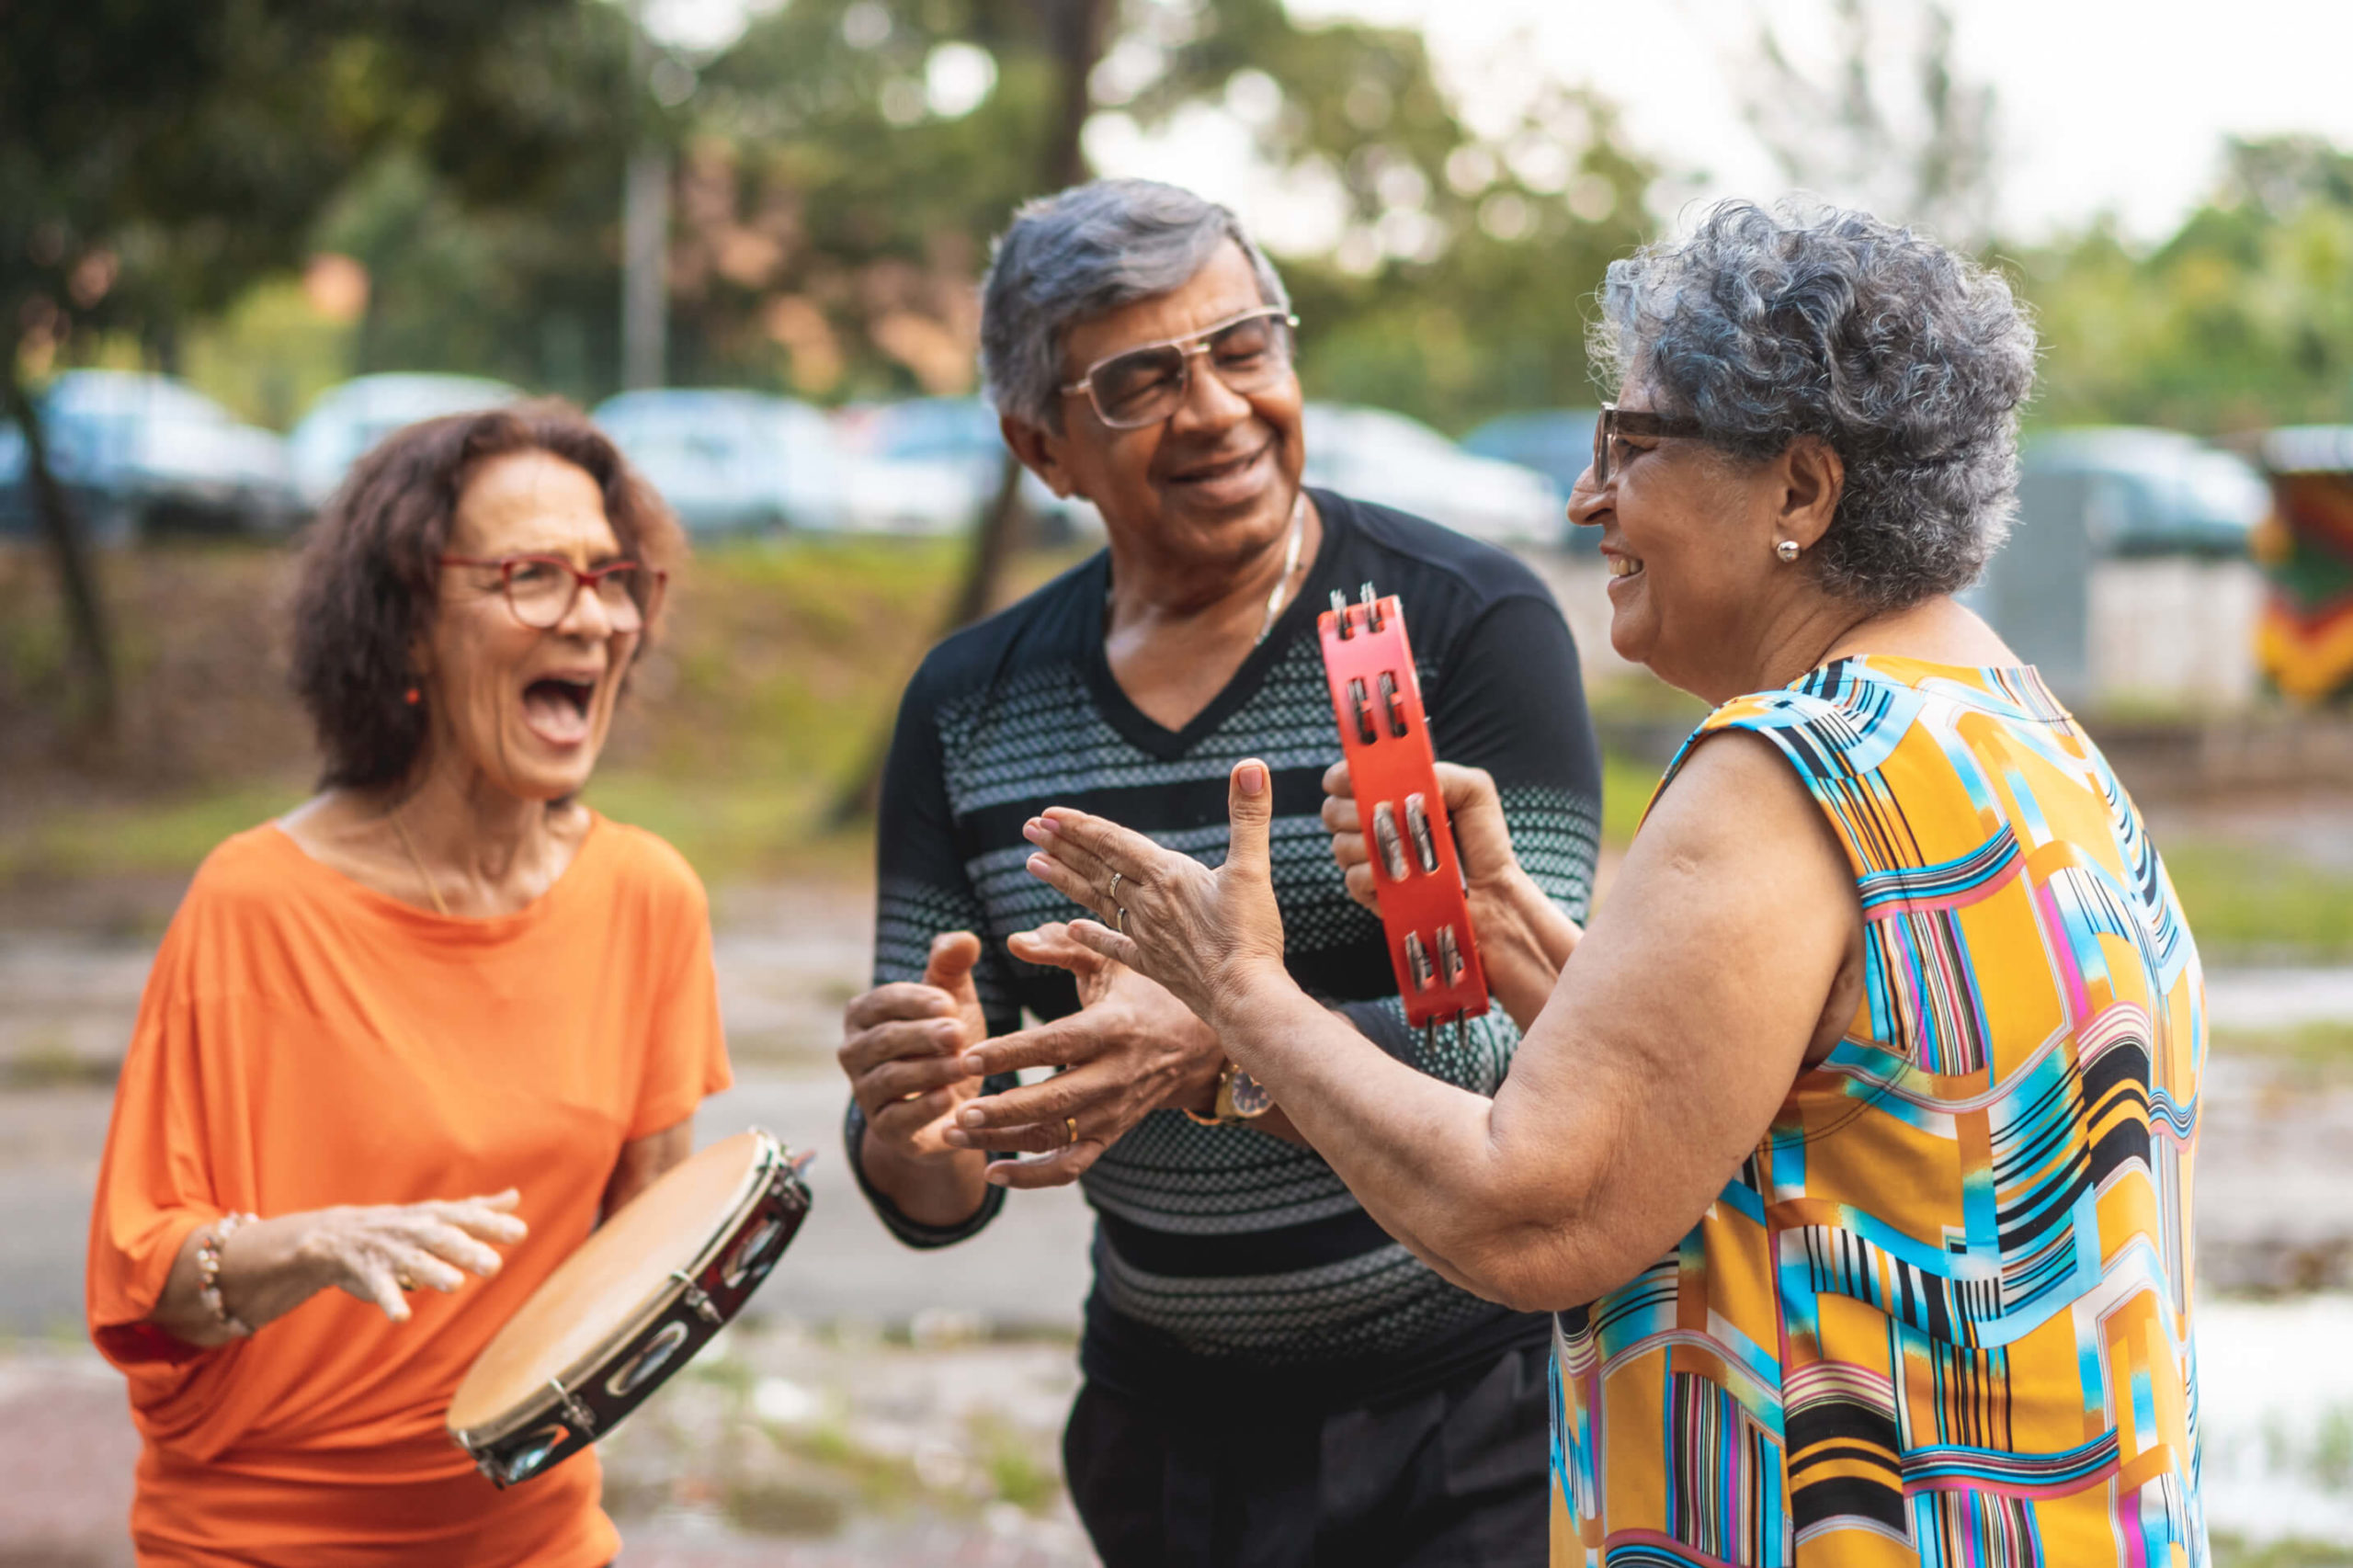 Group of residents playing music together outside using tambourines.